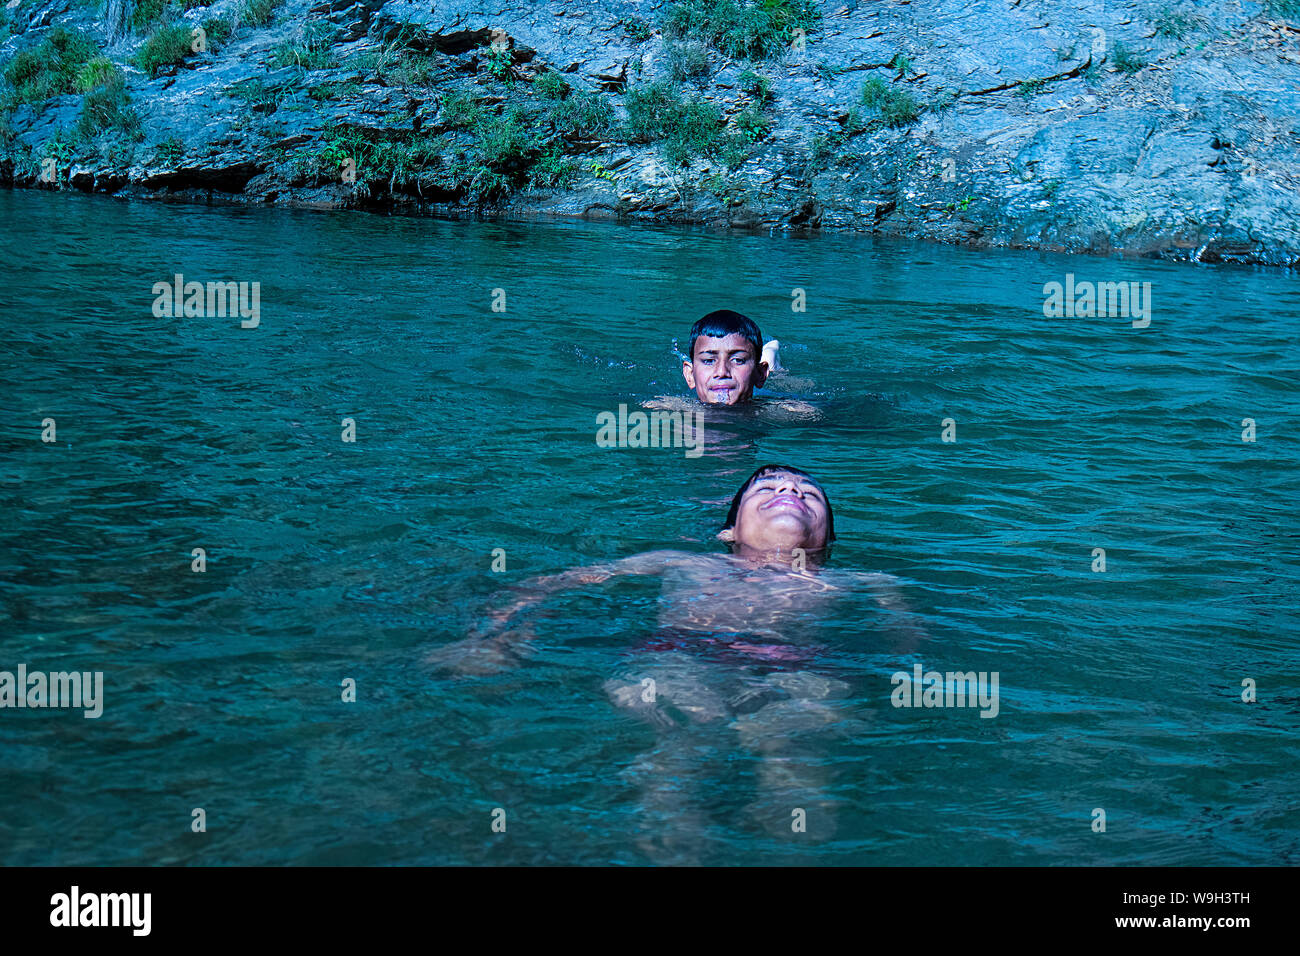 Himachal Pradesh, india - July 20th, 2019: Floating dead body of a drowned male children in River swimming pool murder. concept of safety Stock Photo